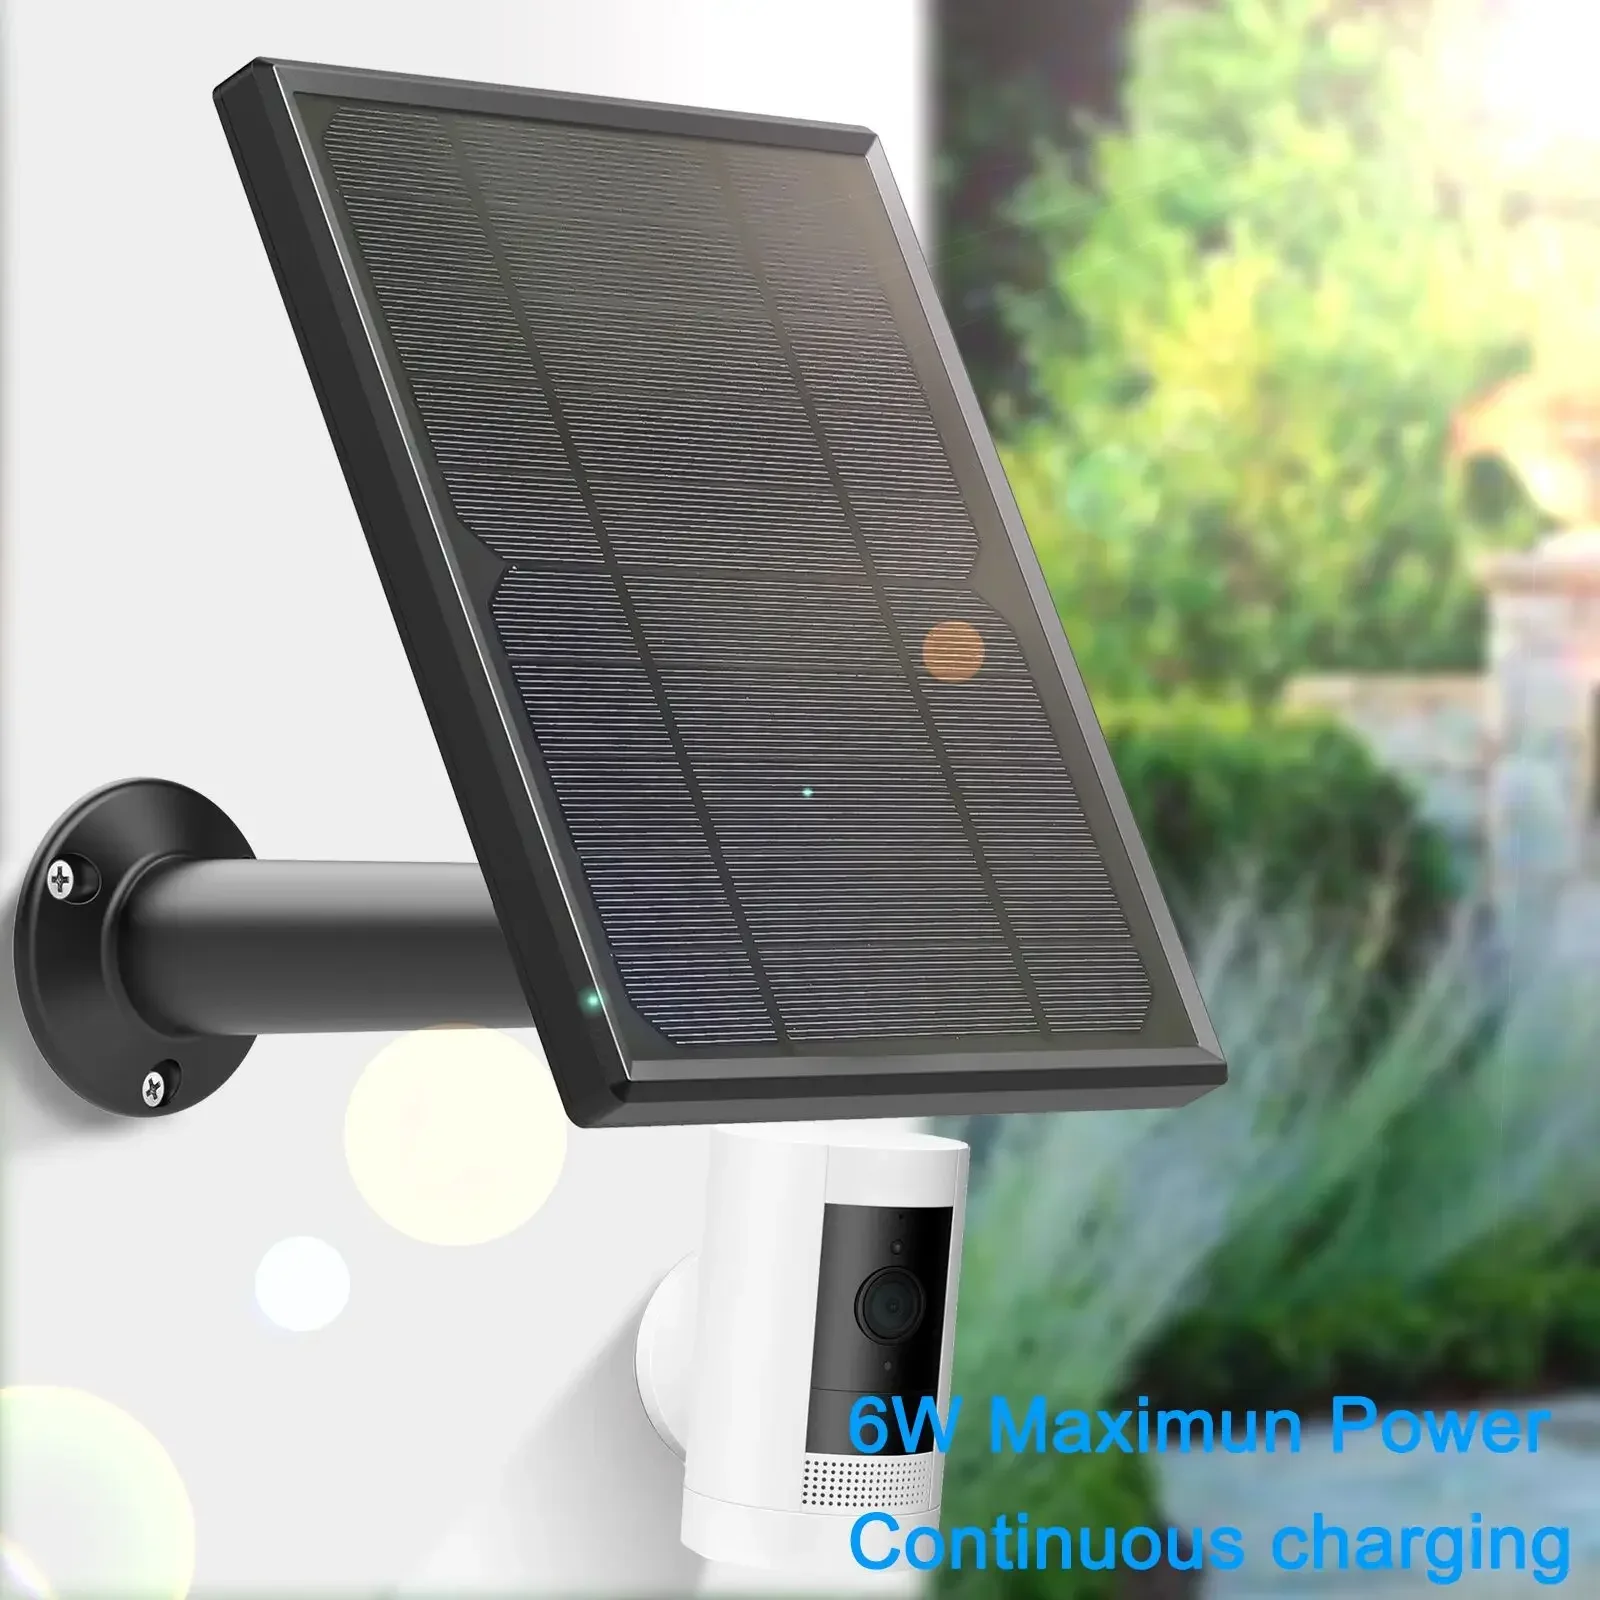 6W Solar panel for Ring Stick Up Cam Battery / Ring Spotlight Cam Battery HD Camera , Wall Mount 13ft 4m Power Cable